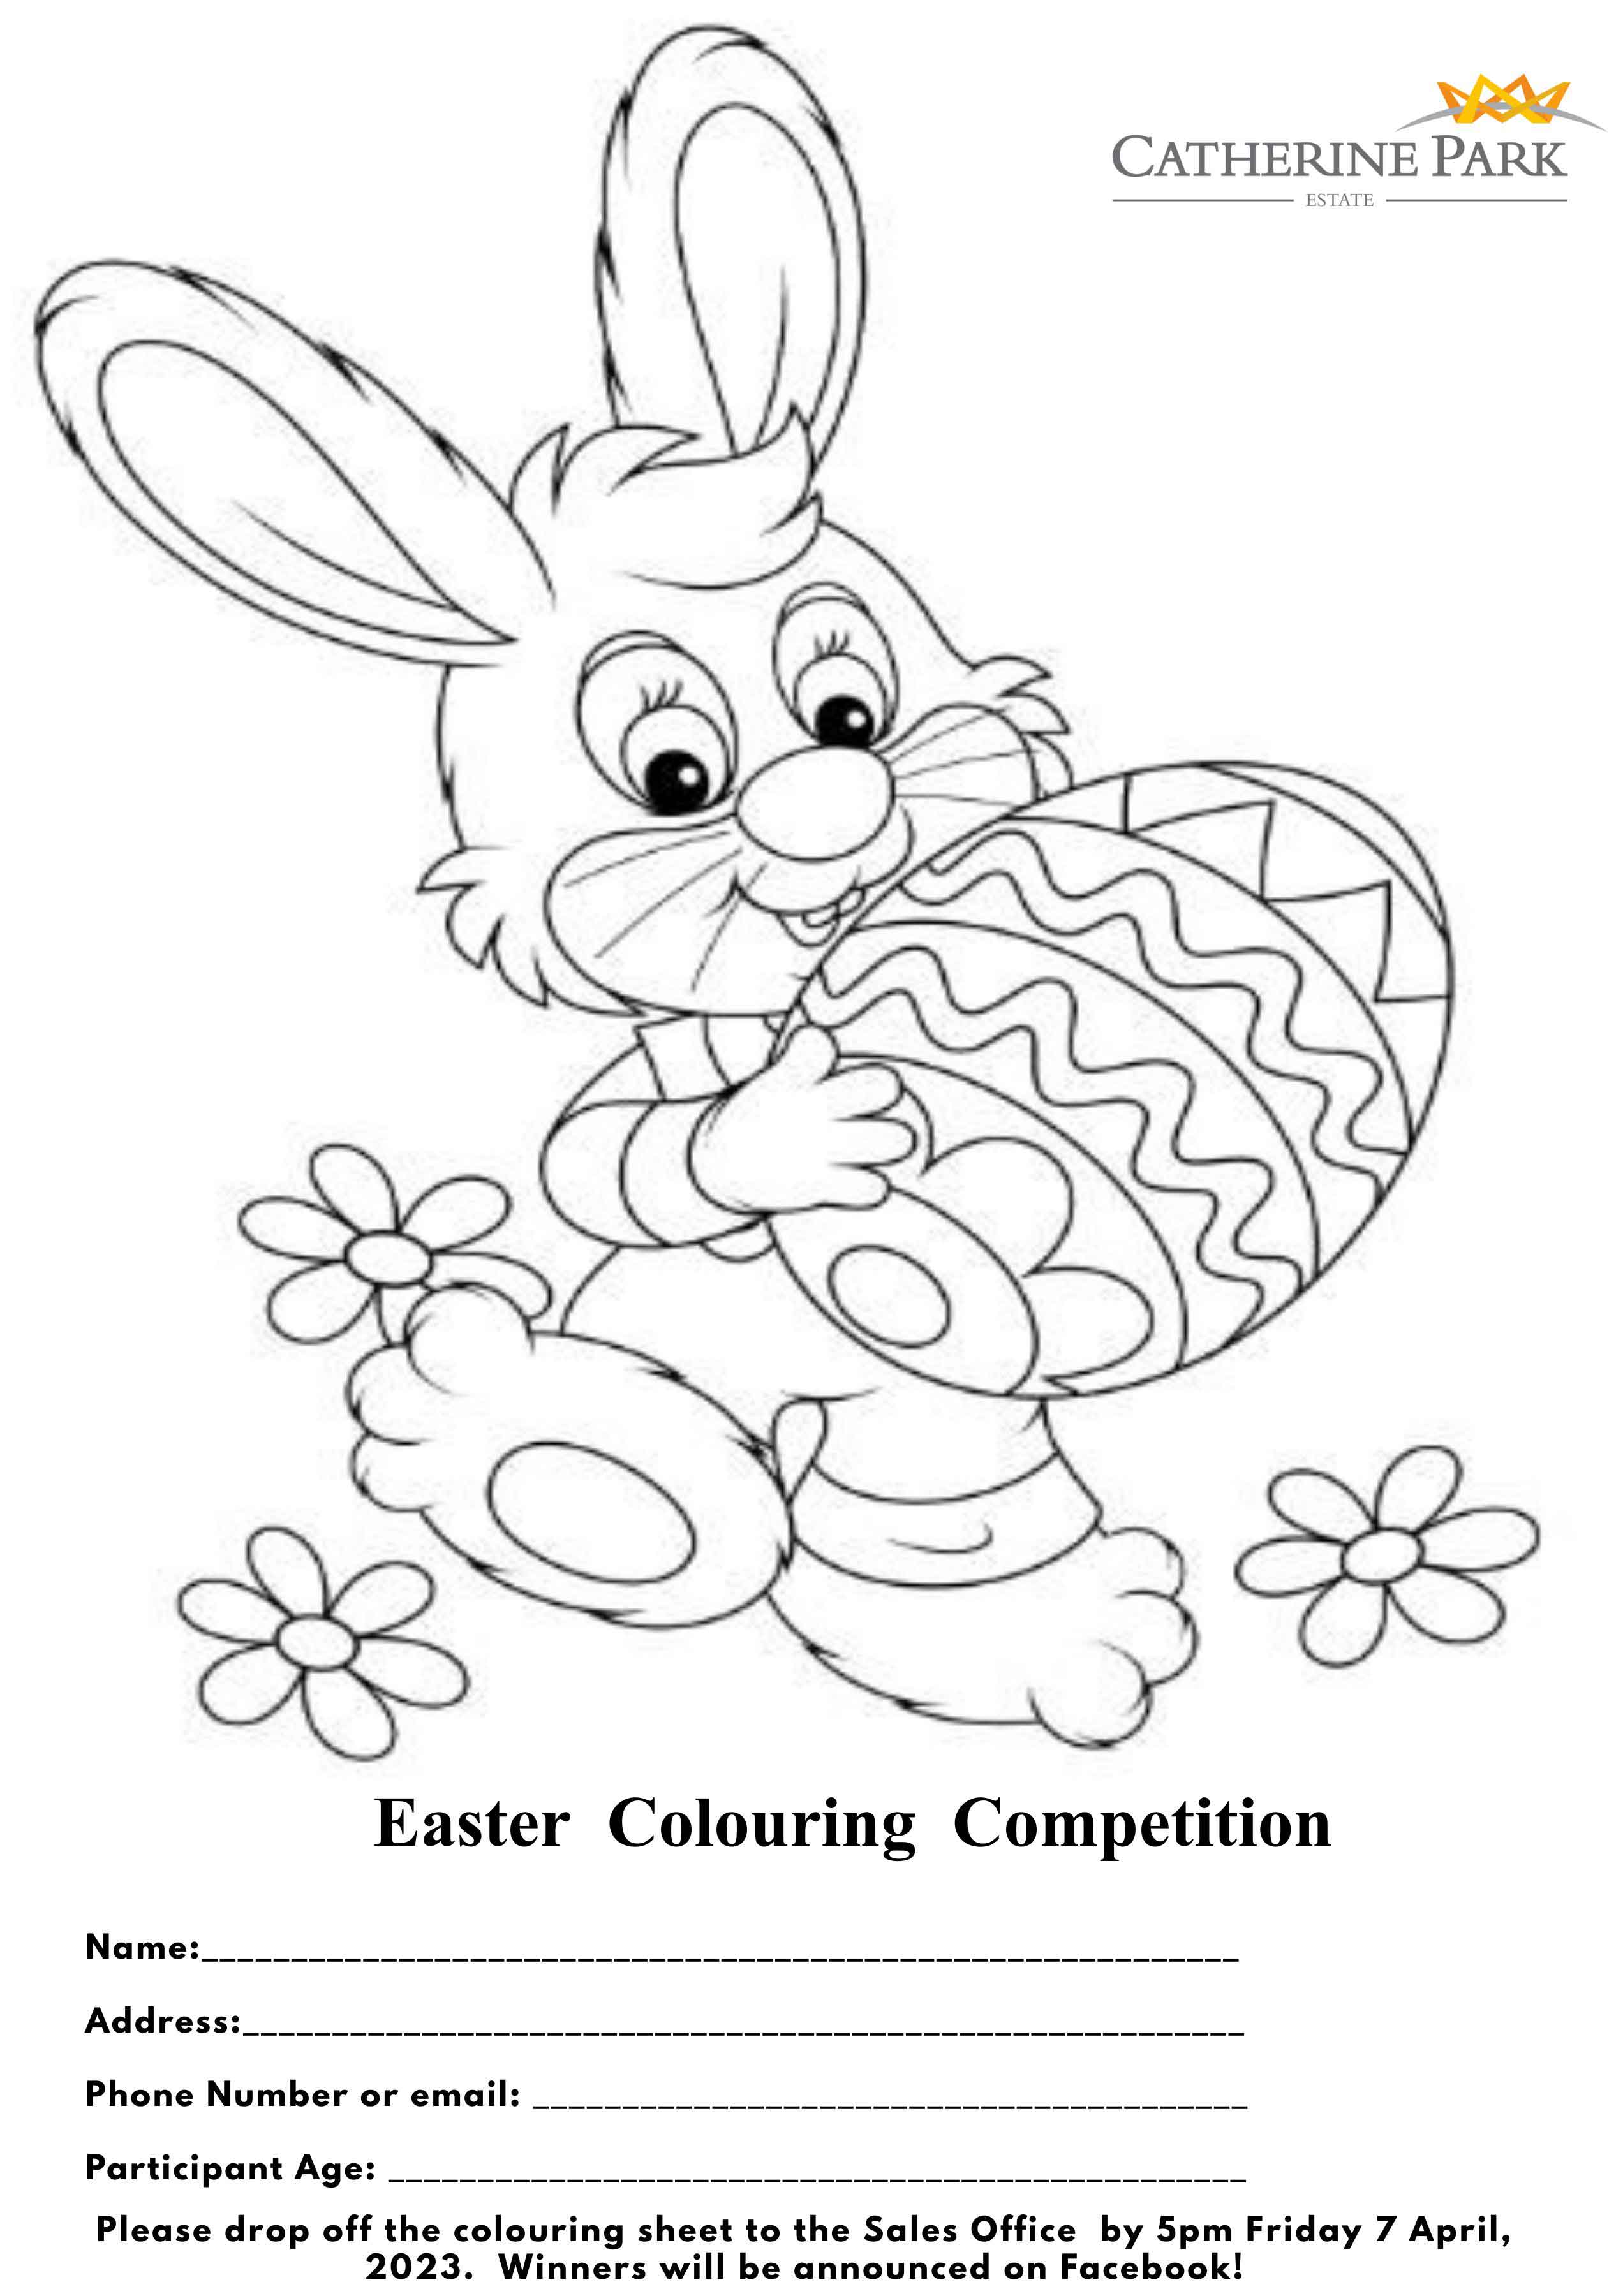 Colouring-in Image